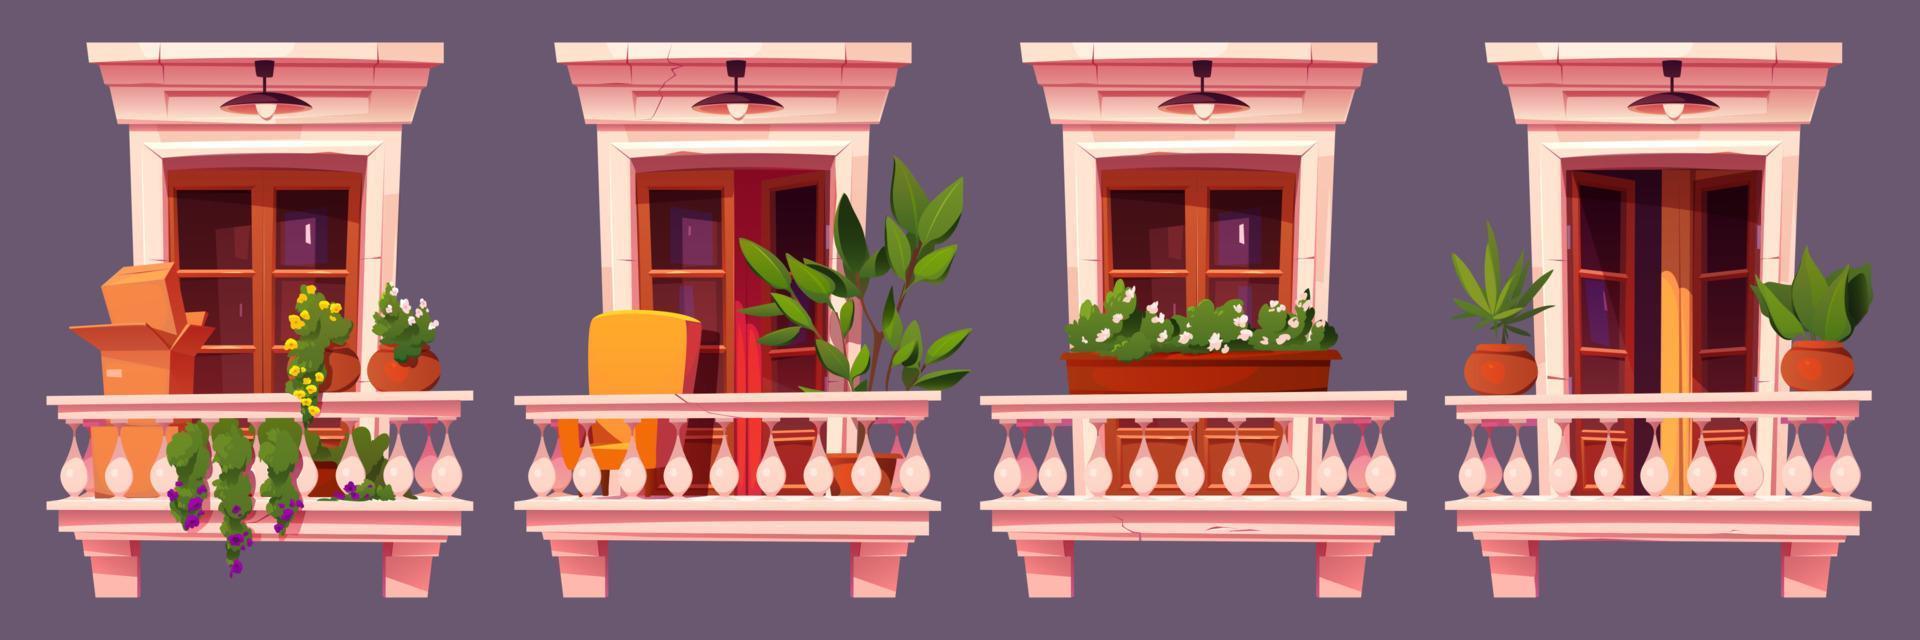 Old apartment house with classic windows vector